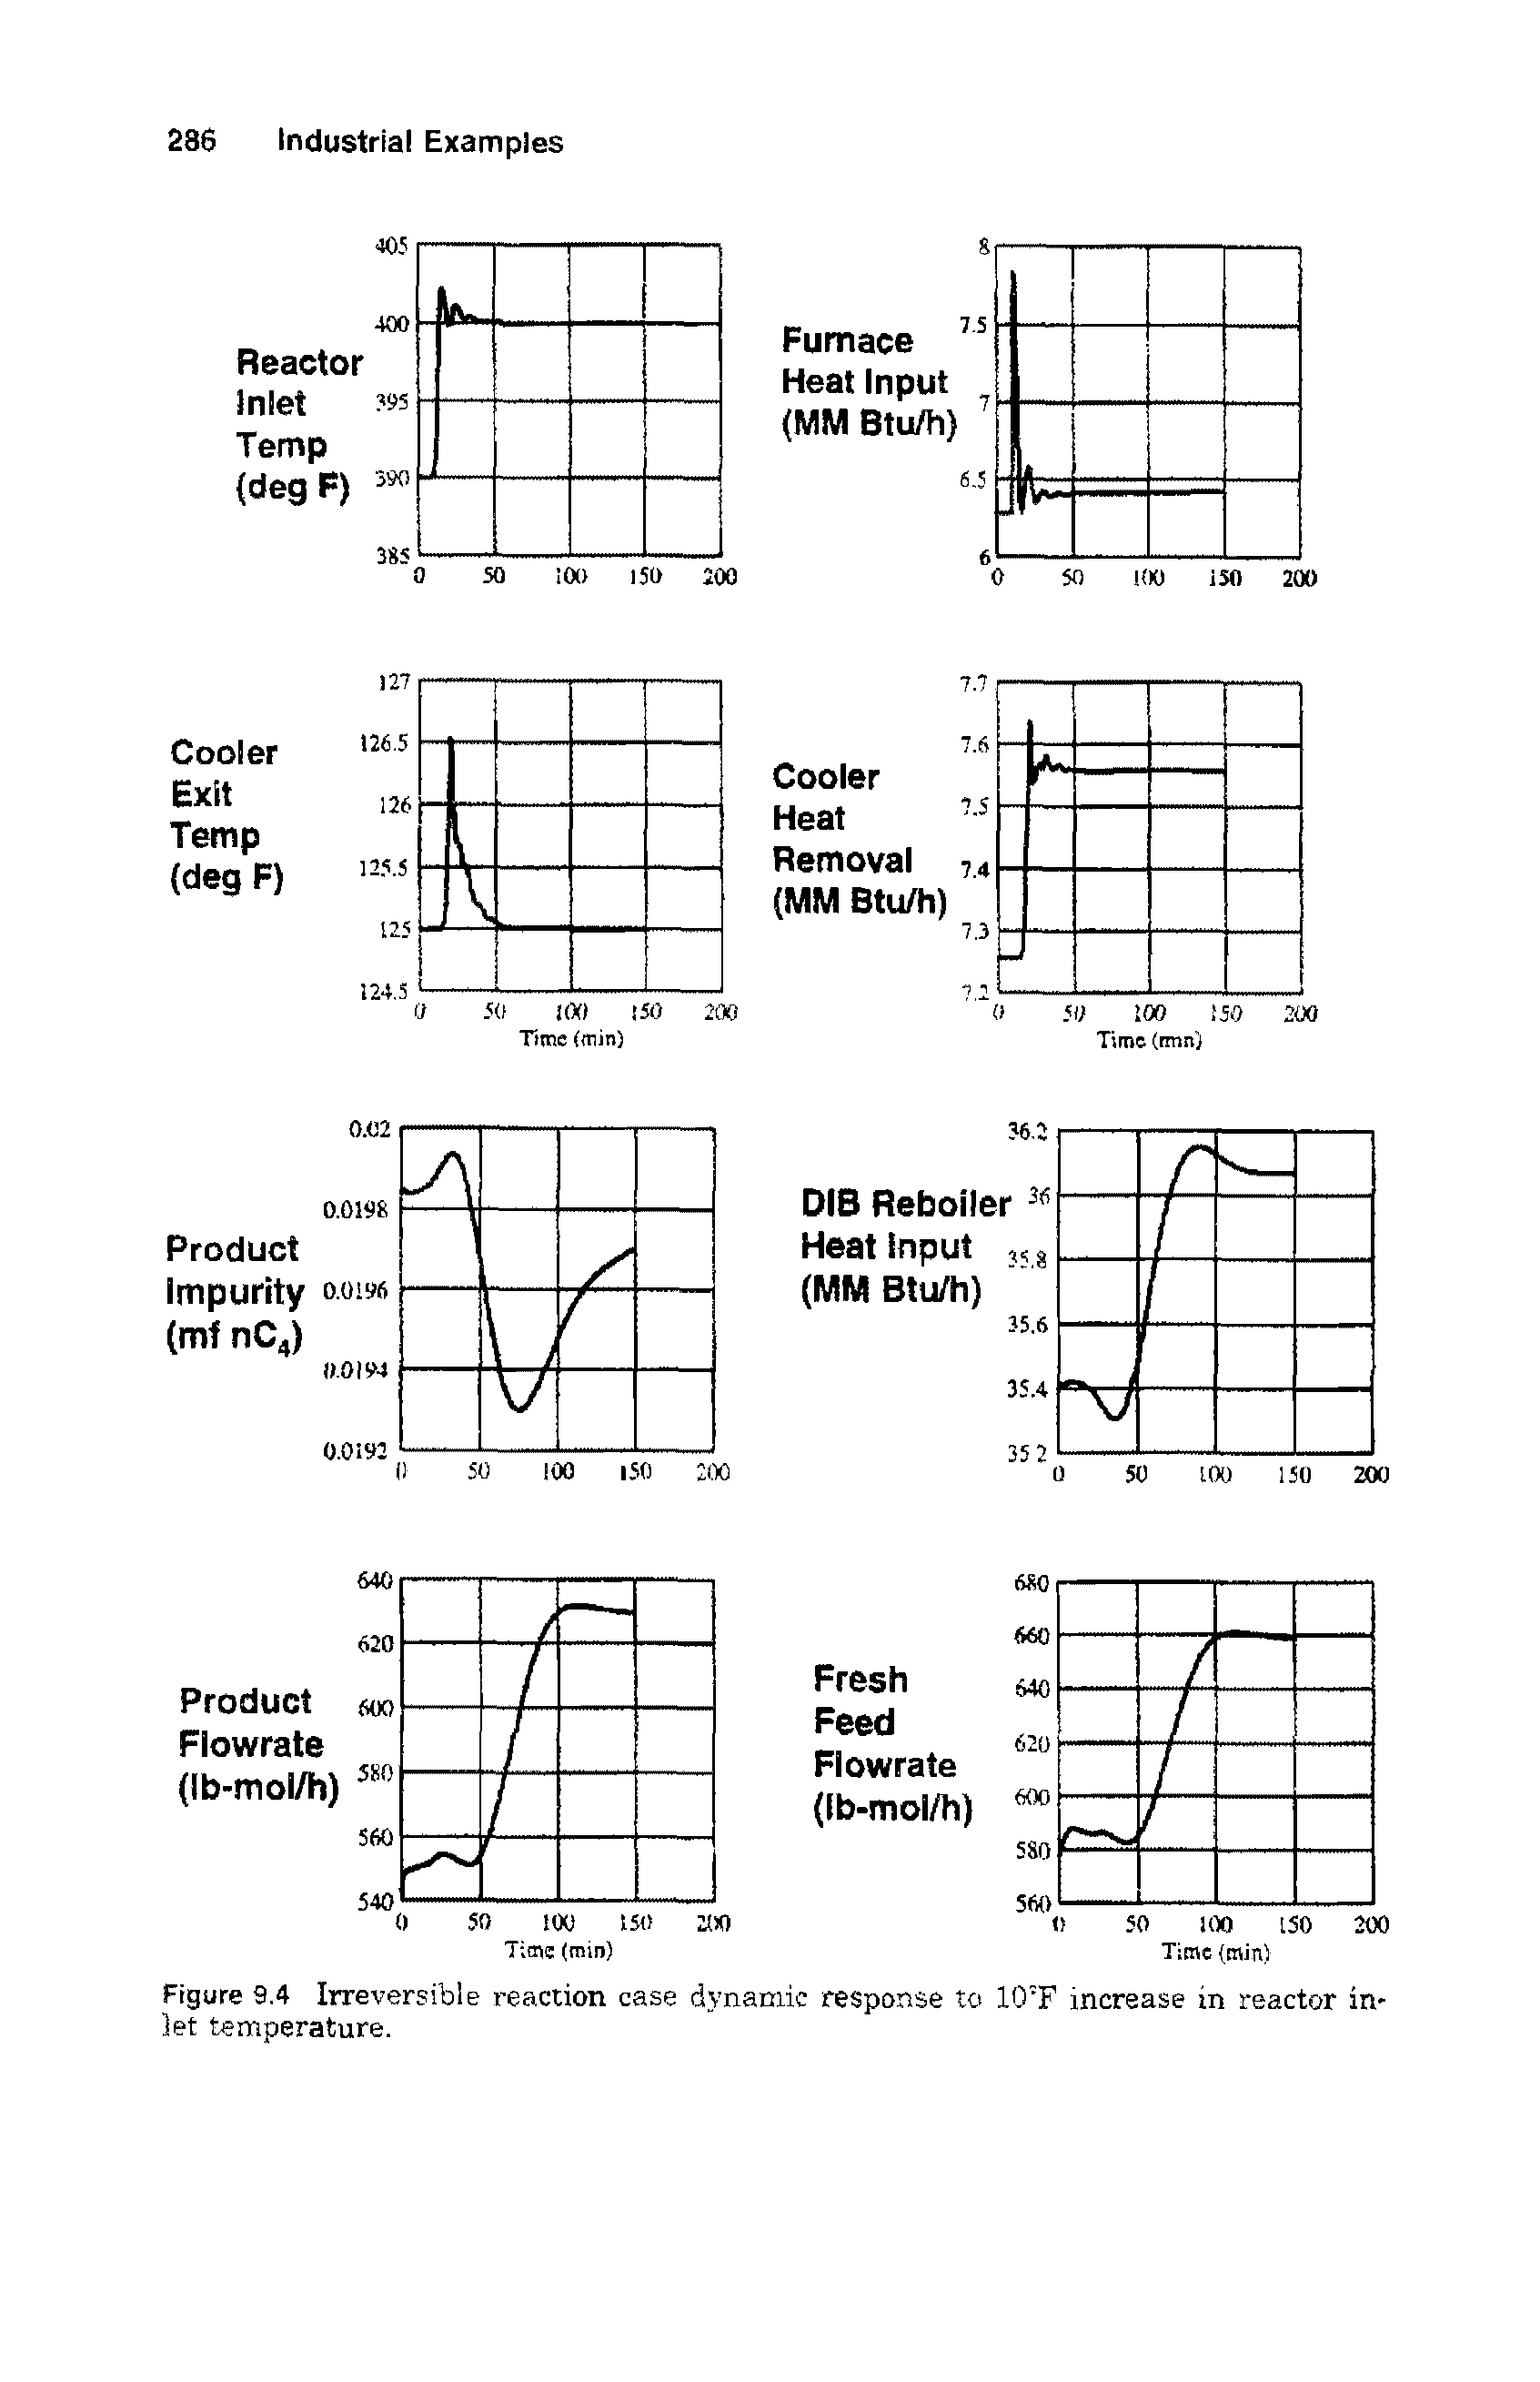 Figure 9.4 Irreversible reaction case dynamic response to 10 F increase in reactor inlet temperature.